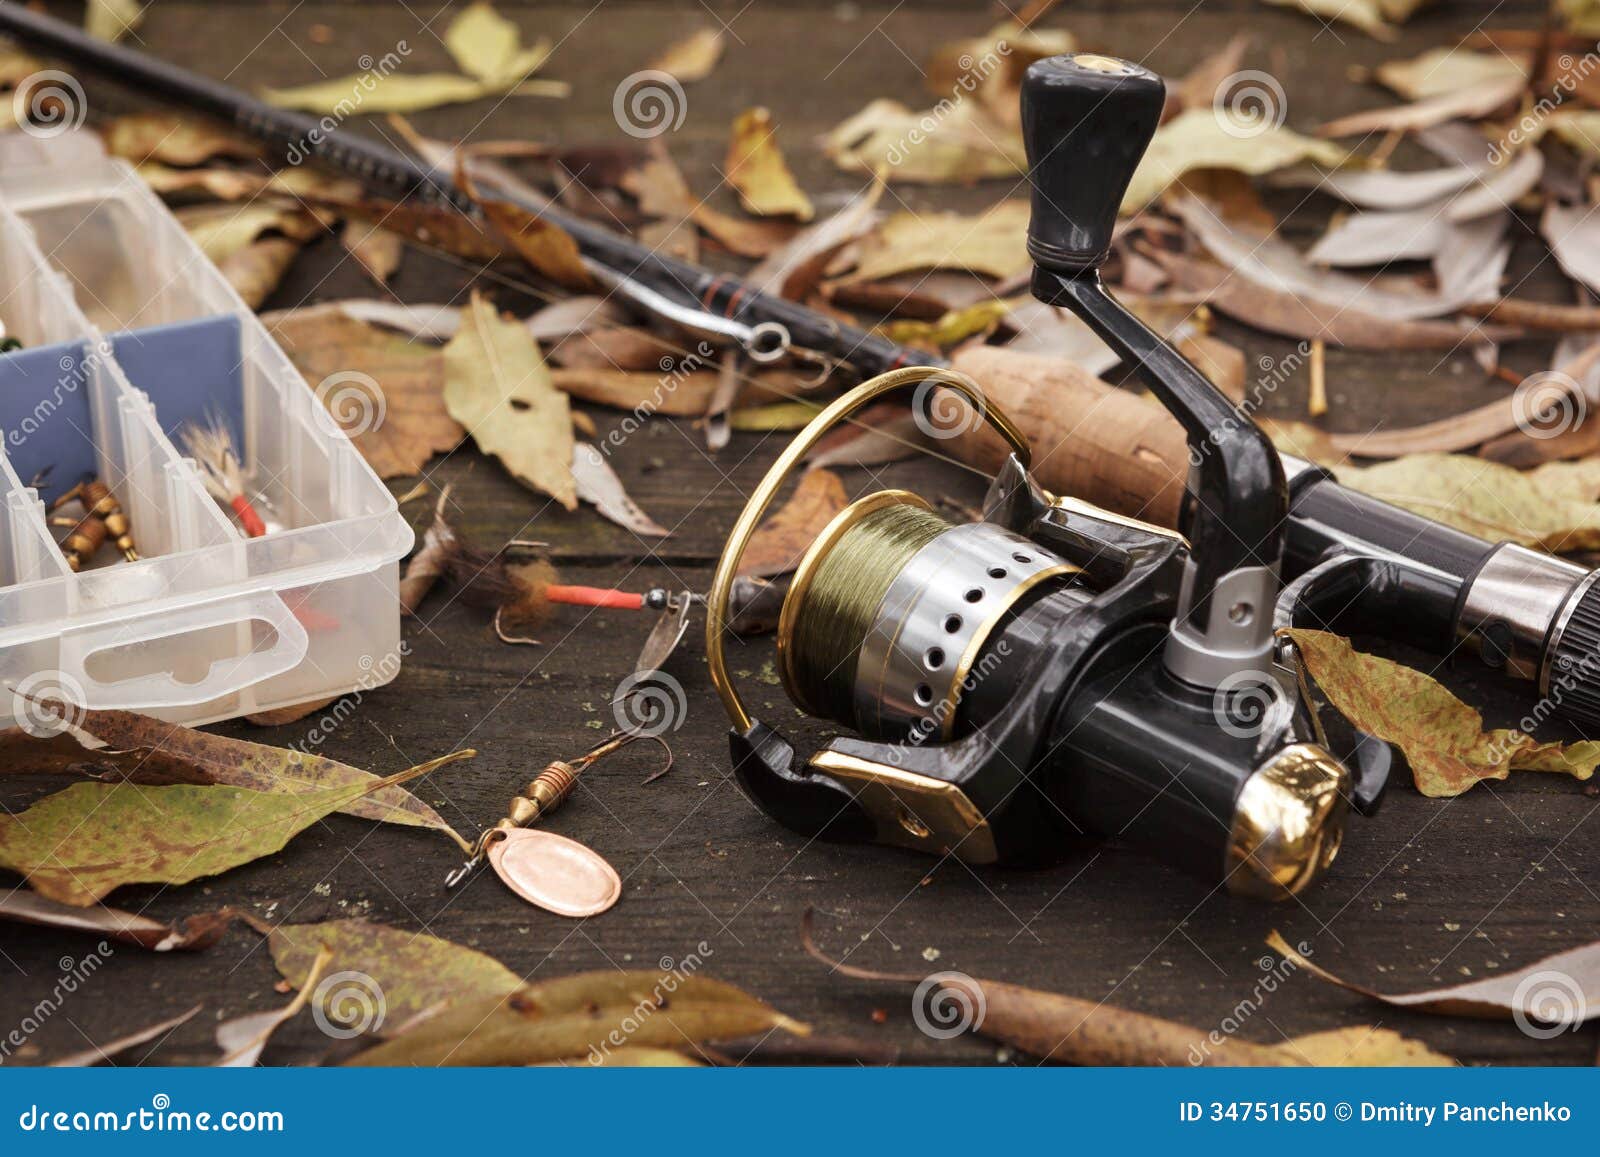 https://thumbs.dreamstime.com/z/fishing-tackle-wooden-surface-weathered-34751650.jpg